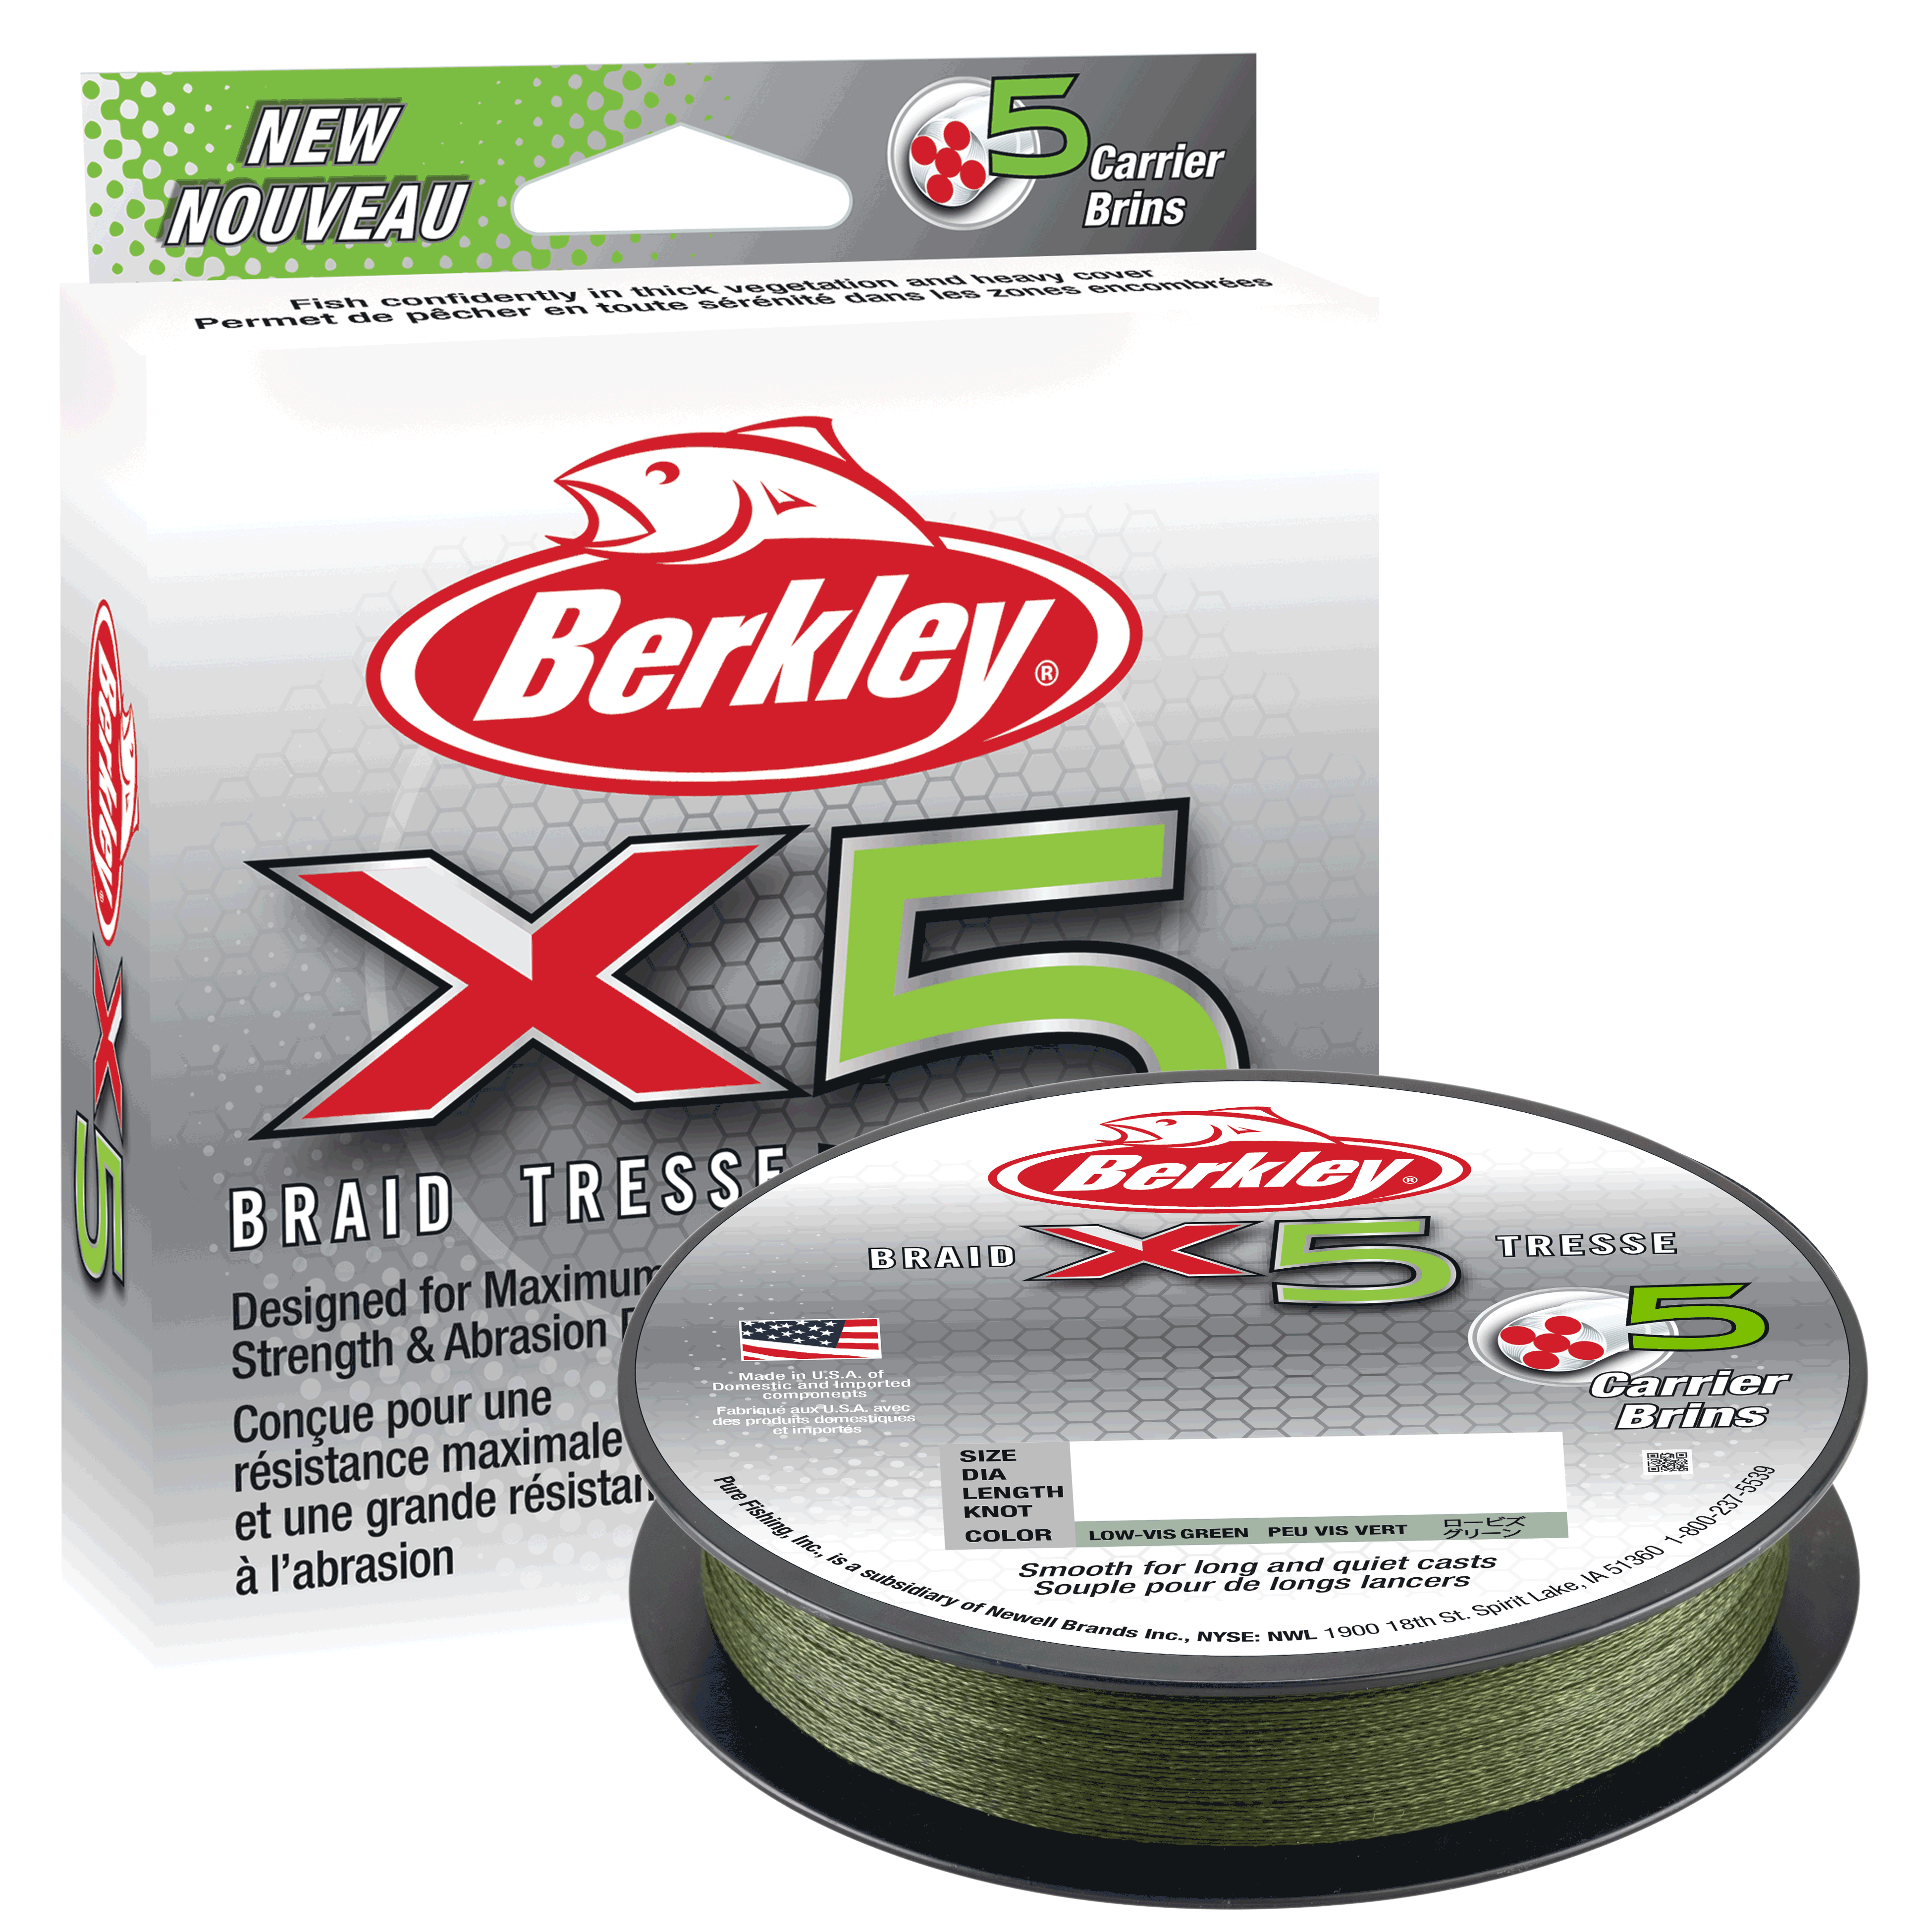 Berkley x5 Braid<BR>The new Berkley x5 and x9 braided lines take strength and reliability to the next level by adding another strand, respectively, all while keeping the same diameter as traditional four- and eight-carrier braids. Designed for maximum strength and abrasion resistance, the new Berkley x5 braided line allows anglers to fish confidently in thick vegetation and heavy cover.